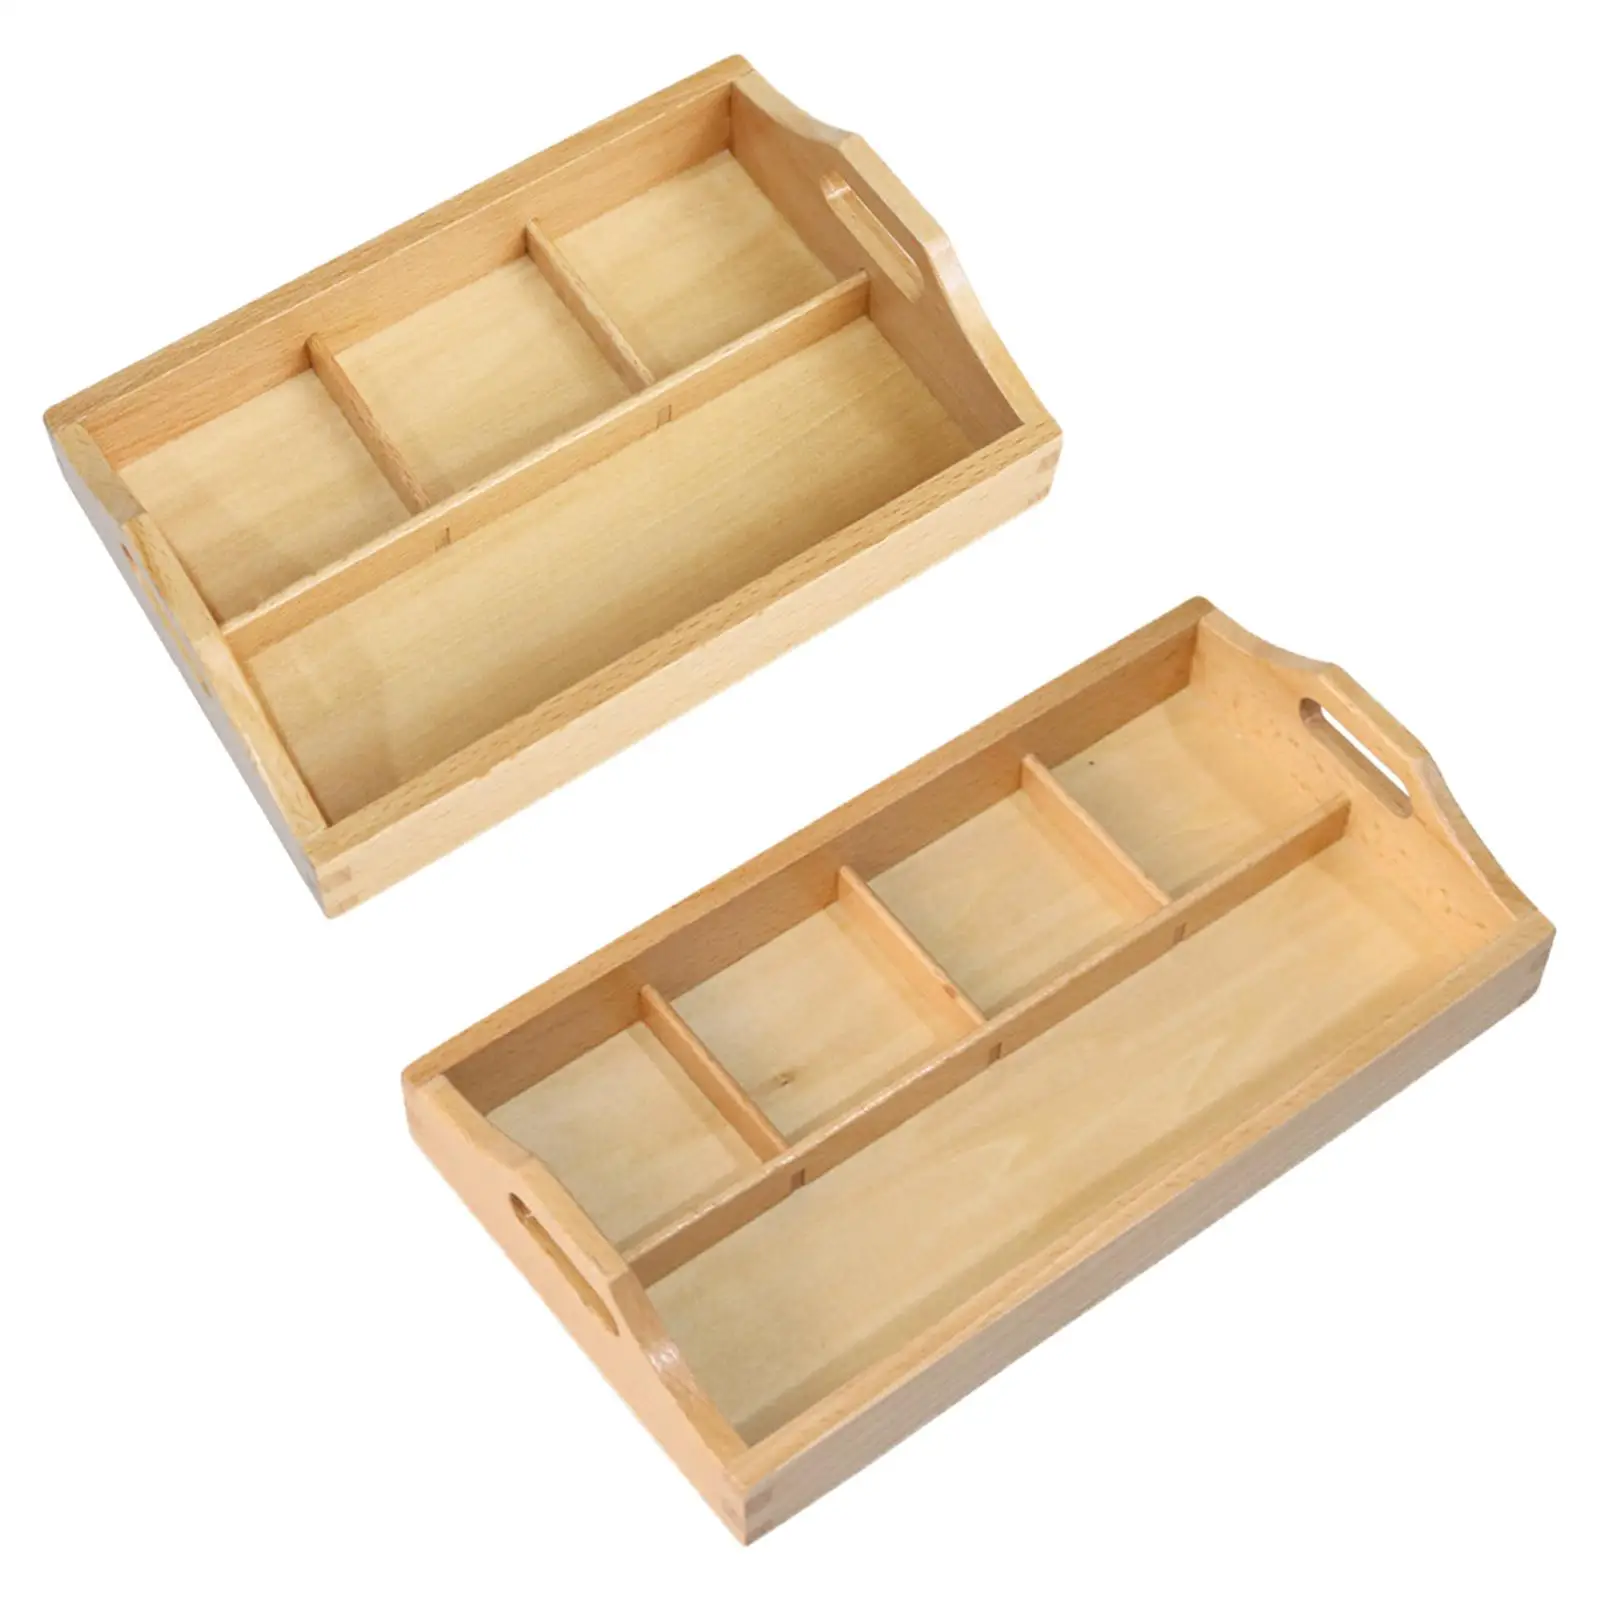 

Montessori Materials Wooden Toy Wood Small Tray Toys for Kids Teaching Receives Pallet Early Education Preschool Baby Children